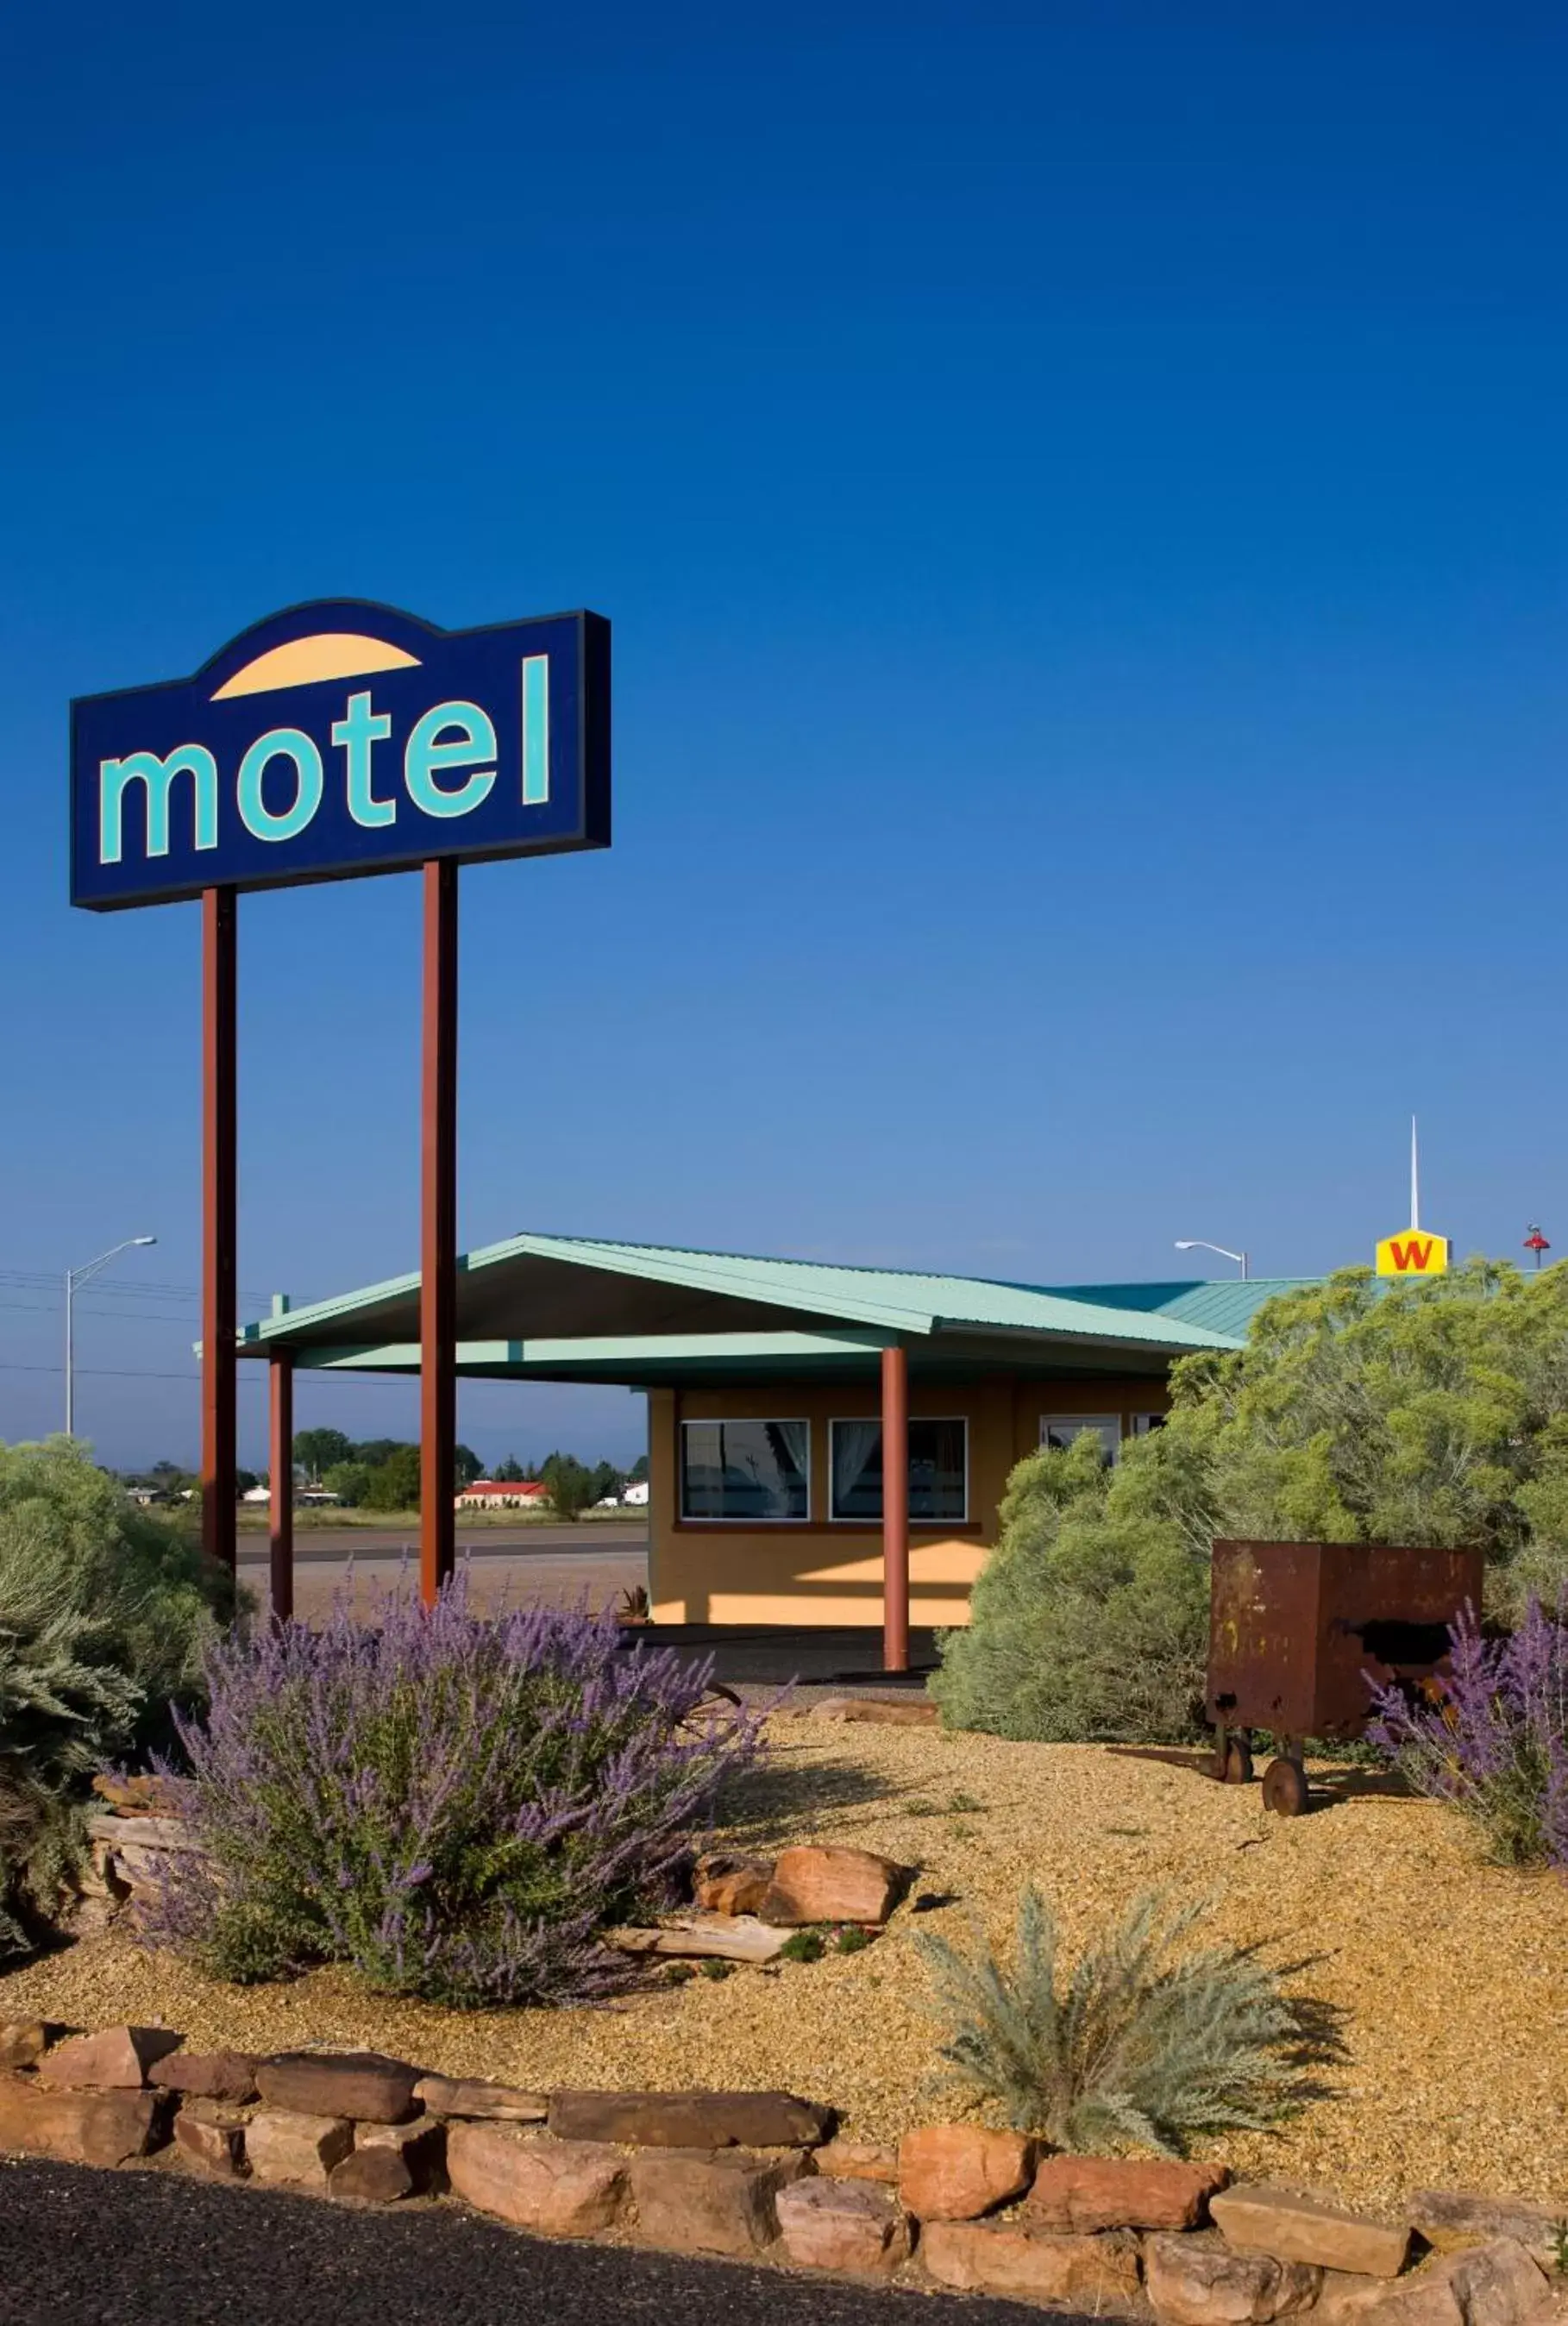 Property Building in Sunset Motel Moriarty